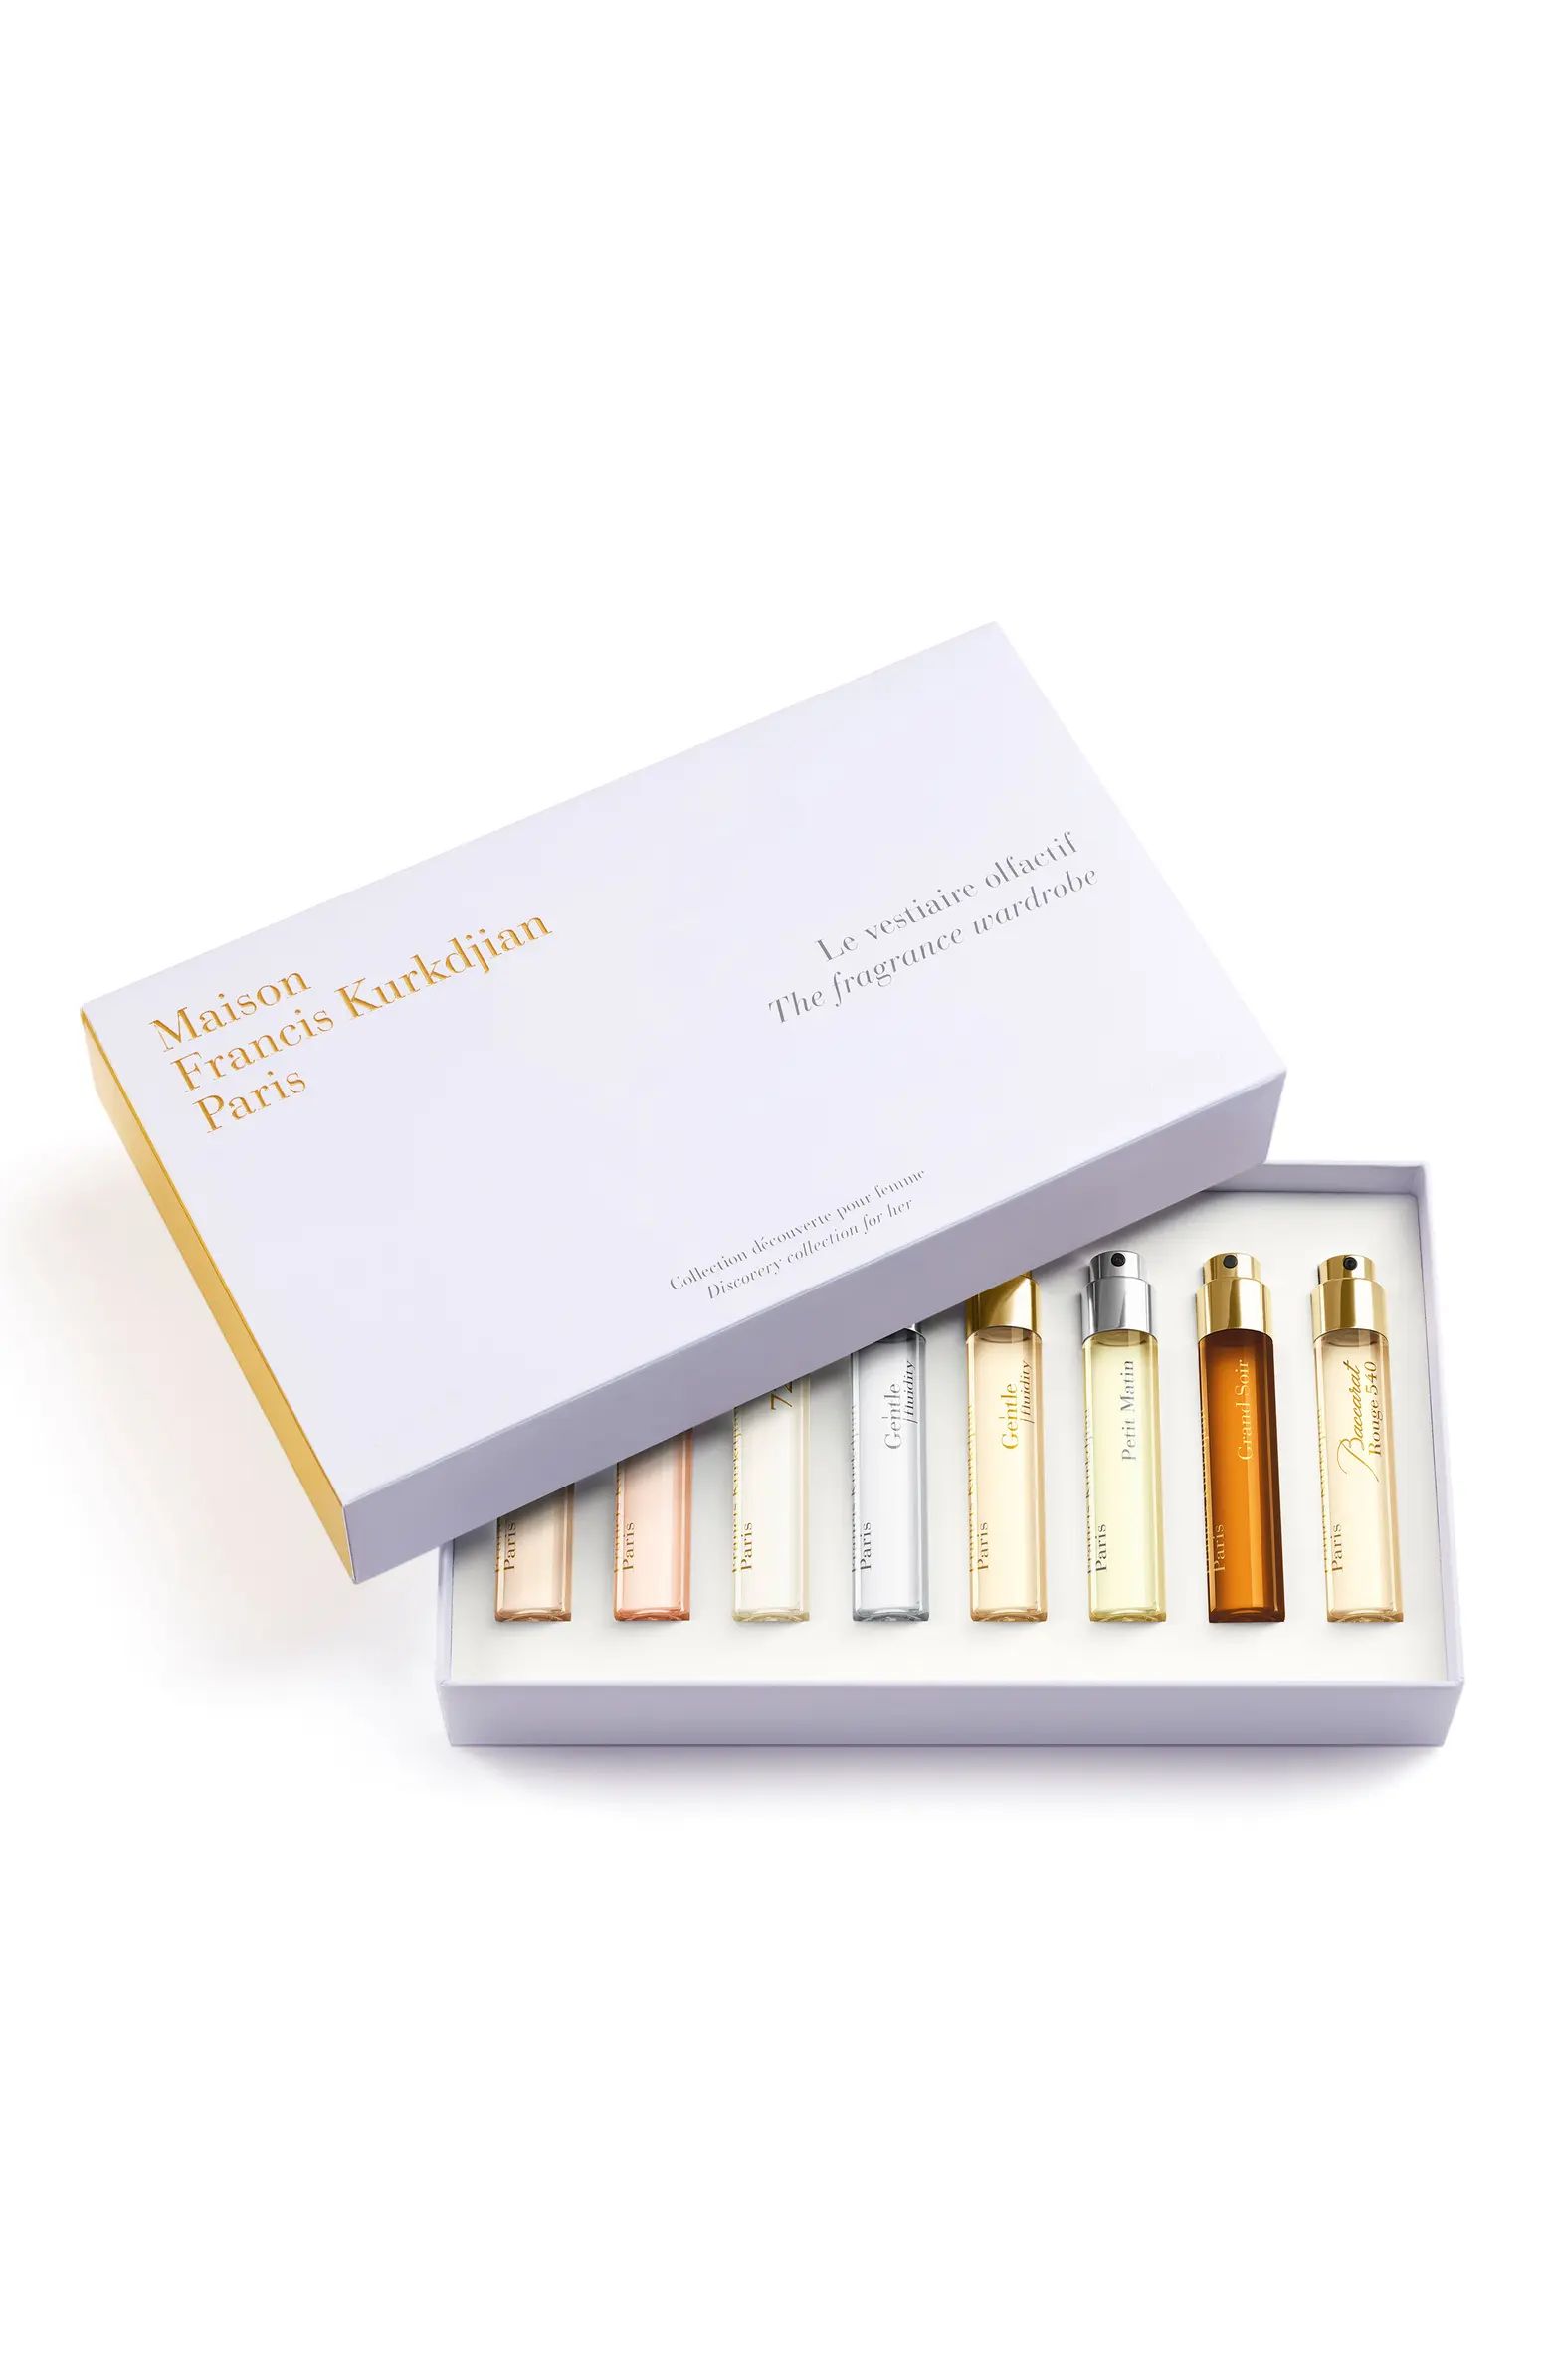 Women's Fragrance Discovery Set (Nordstrom Exclusive) $275 Value | Nordstrom